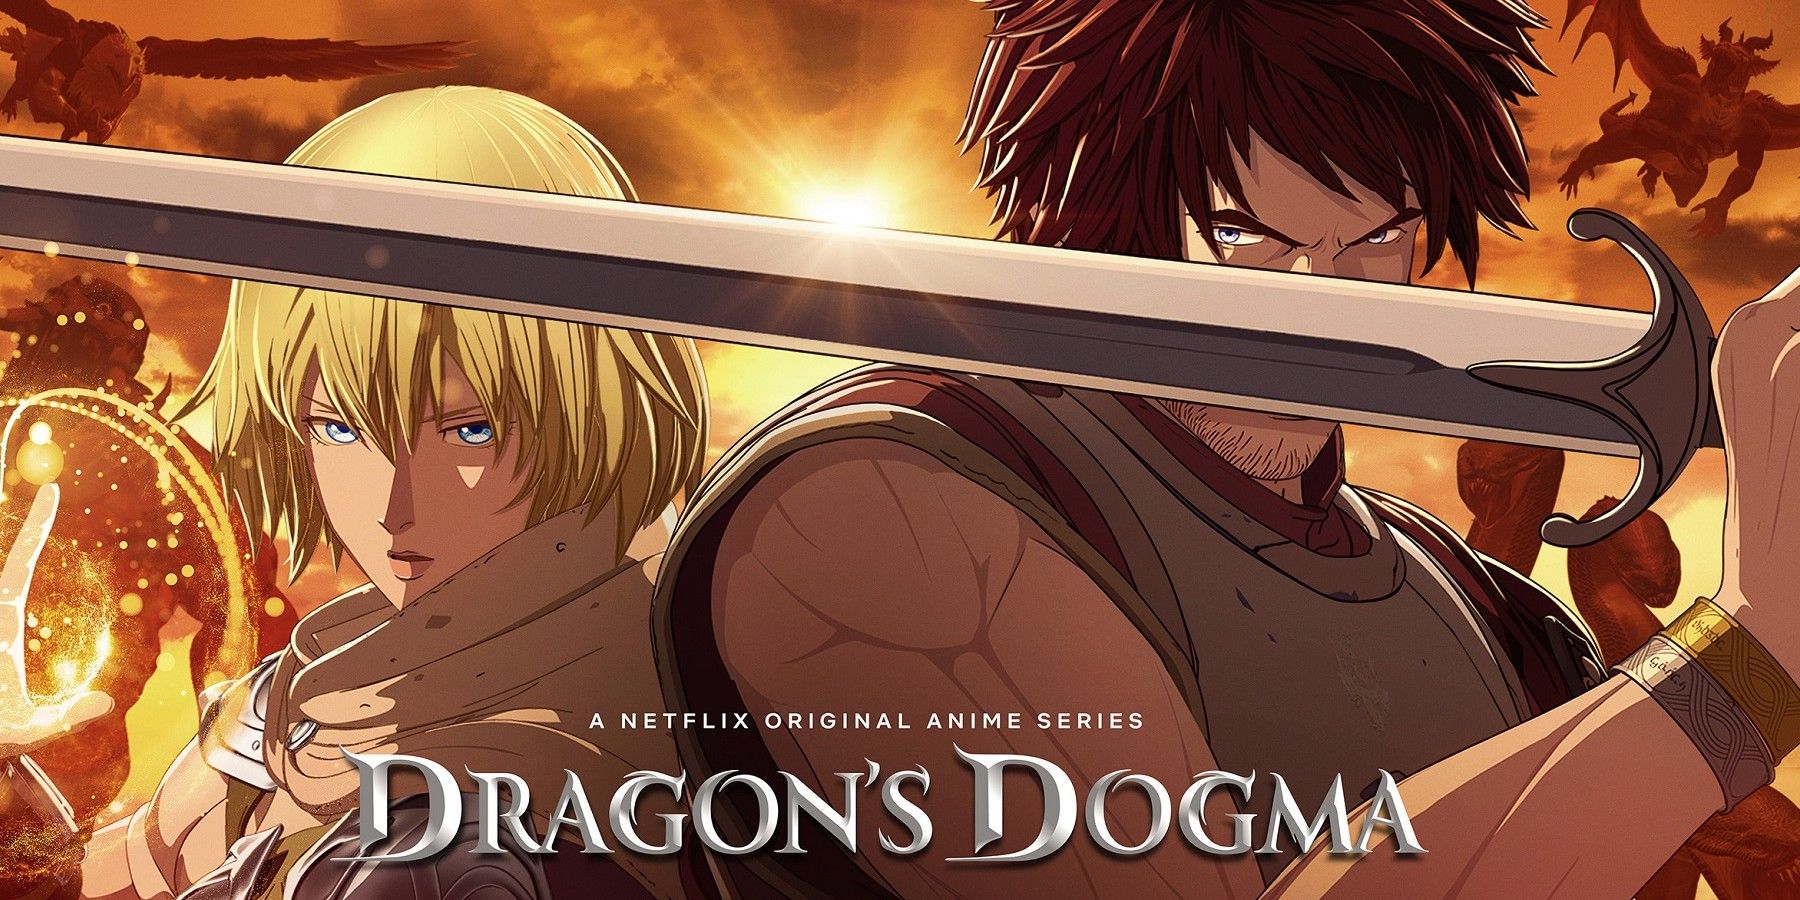 Dragon S Dogma Netflix Anime Trailer Reveals Familiar Foes From The Game